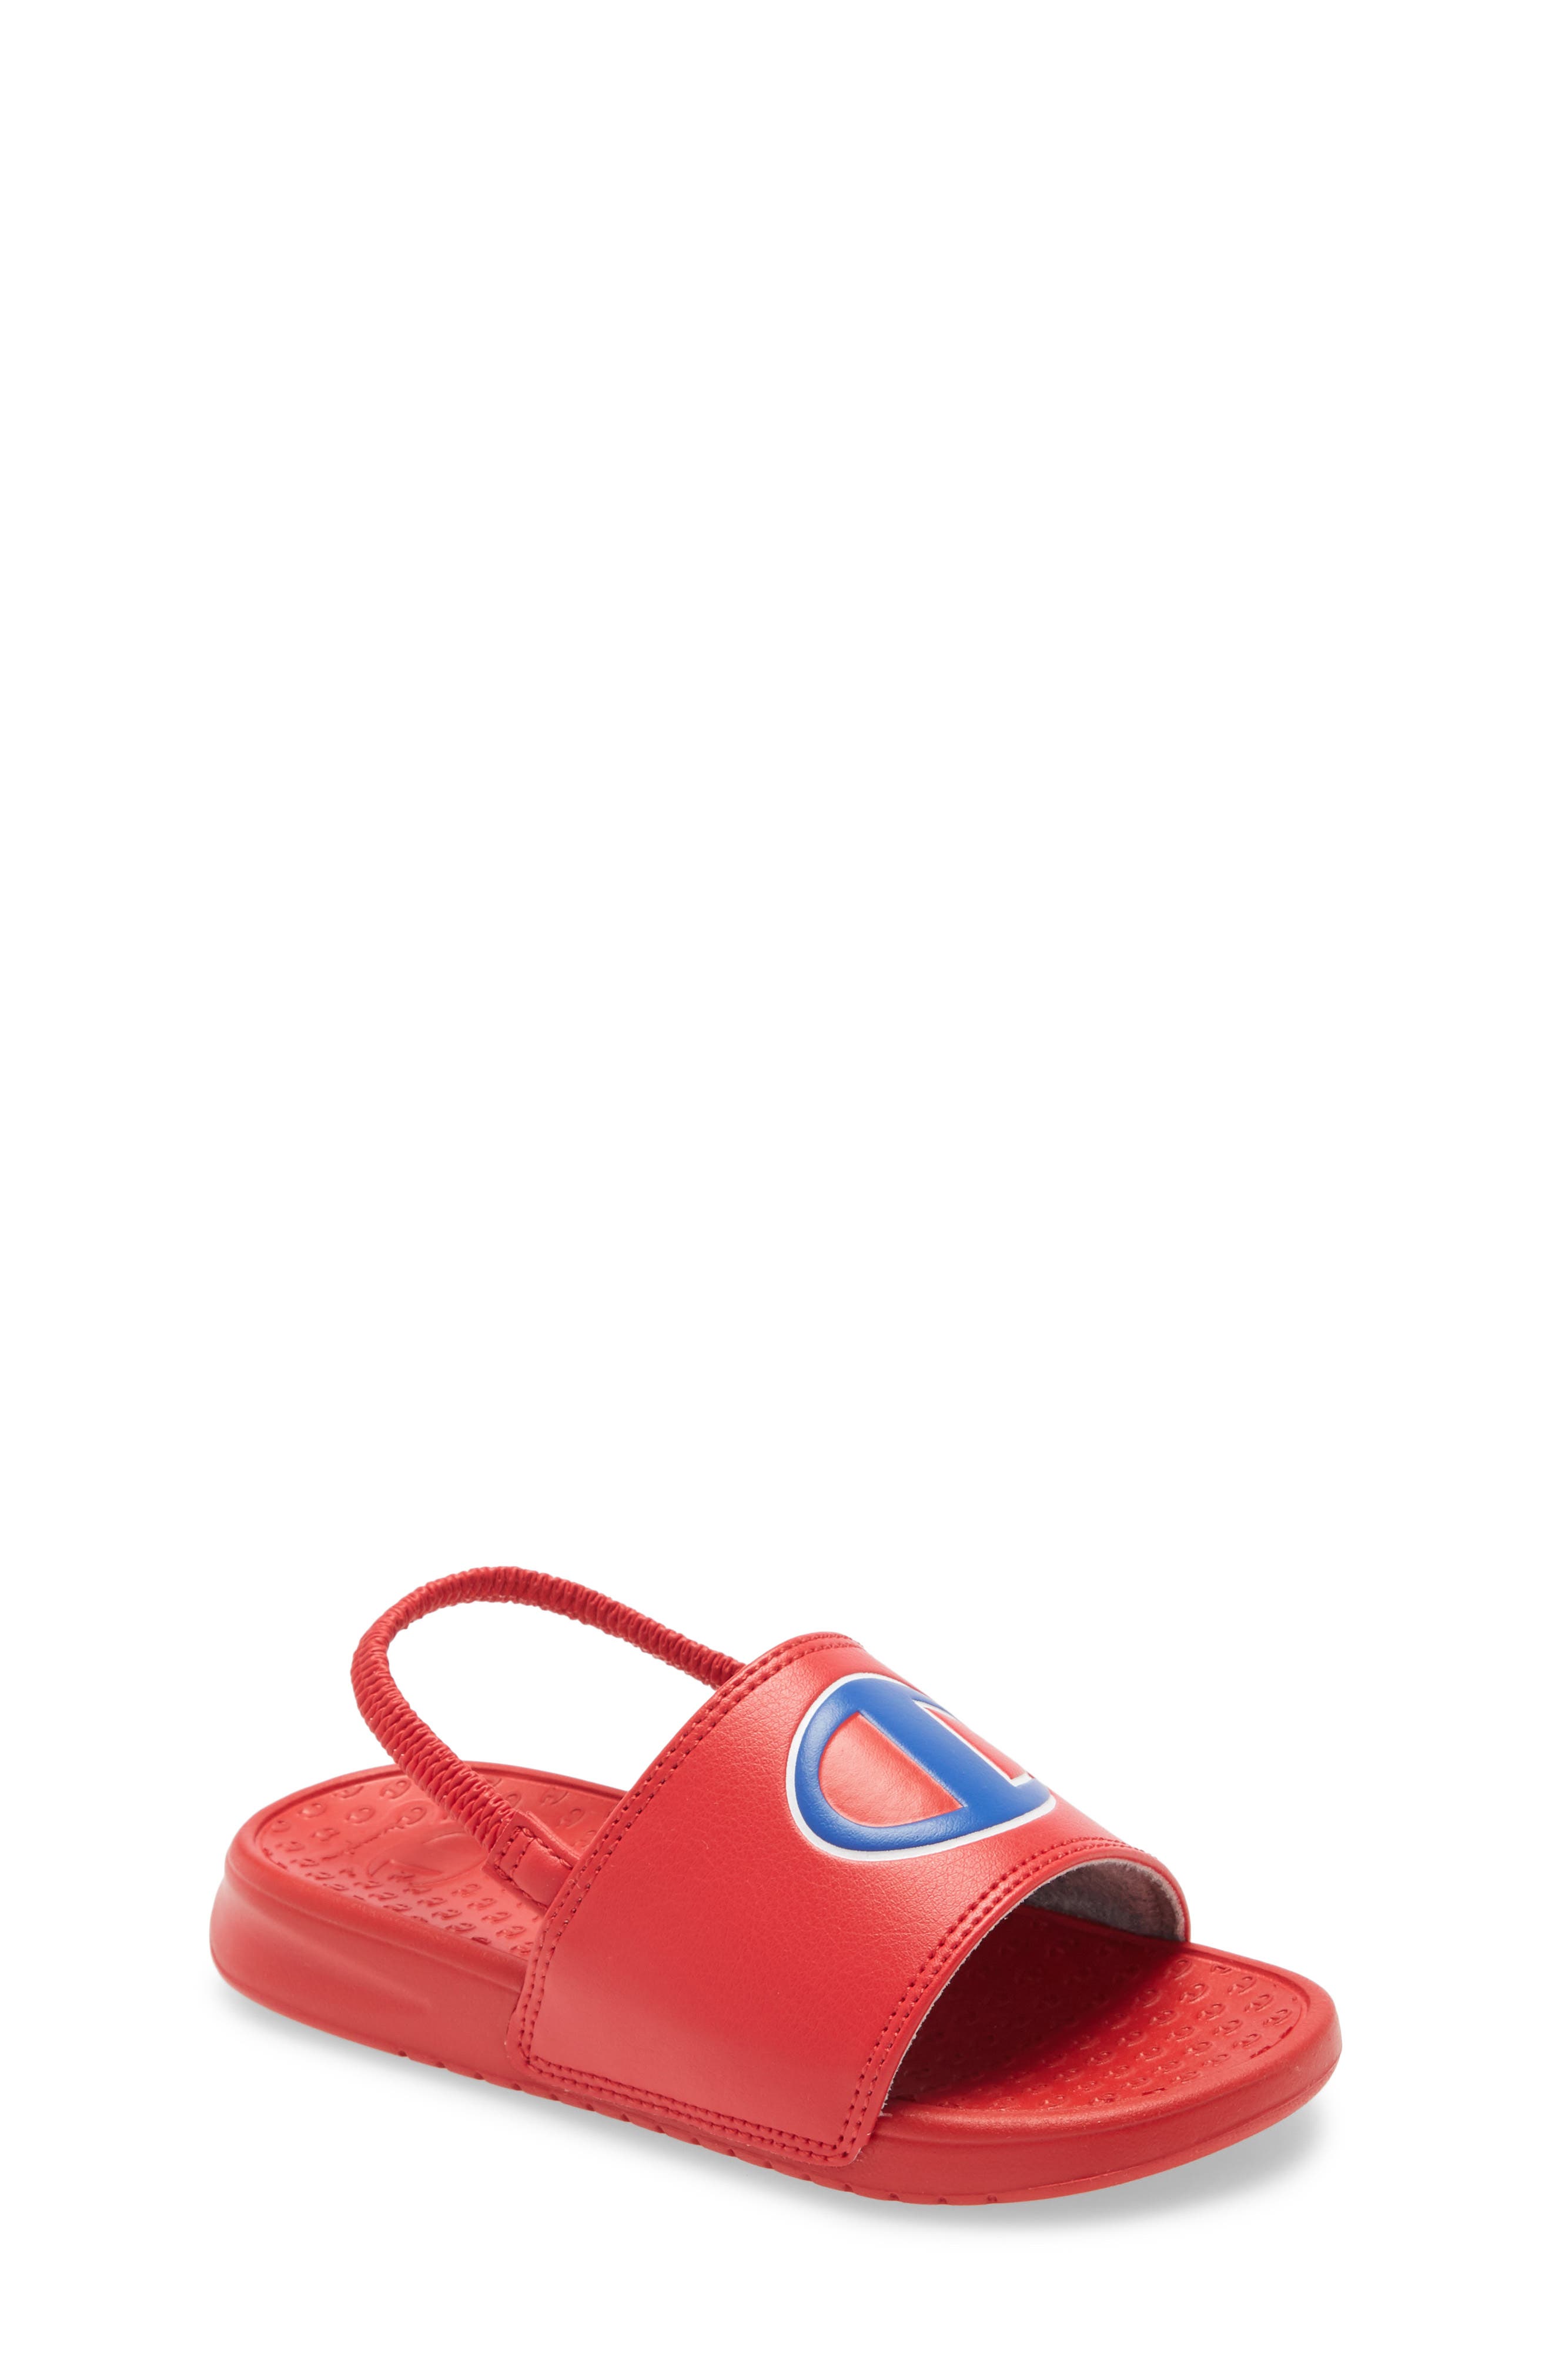 champion shoes for infants